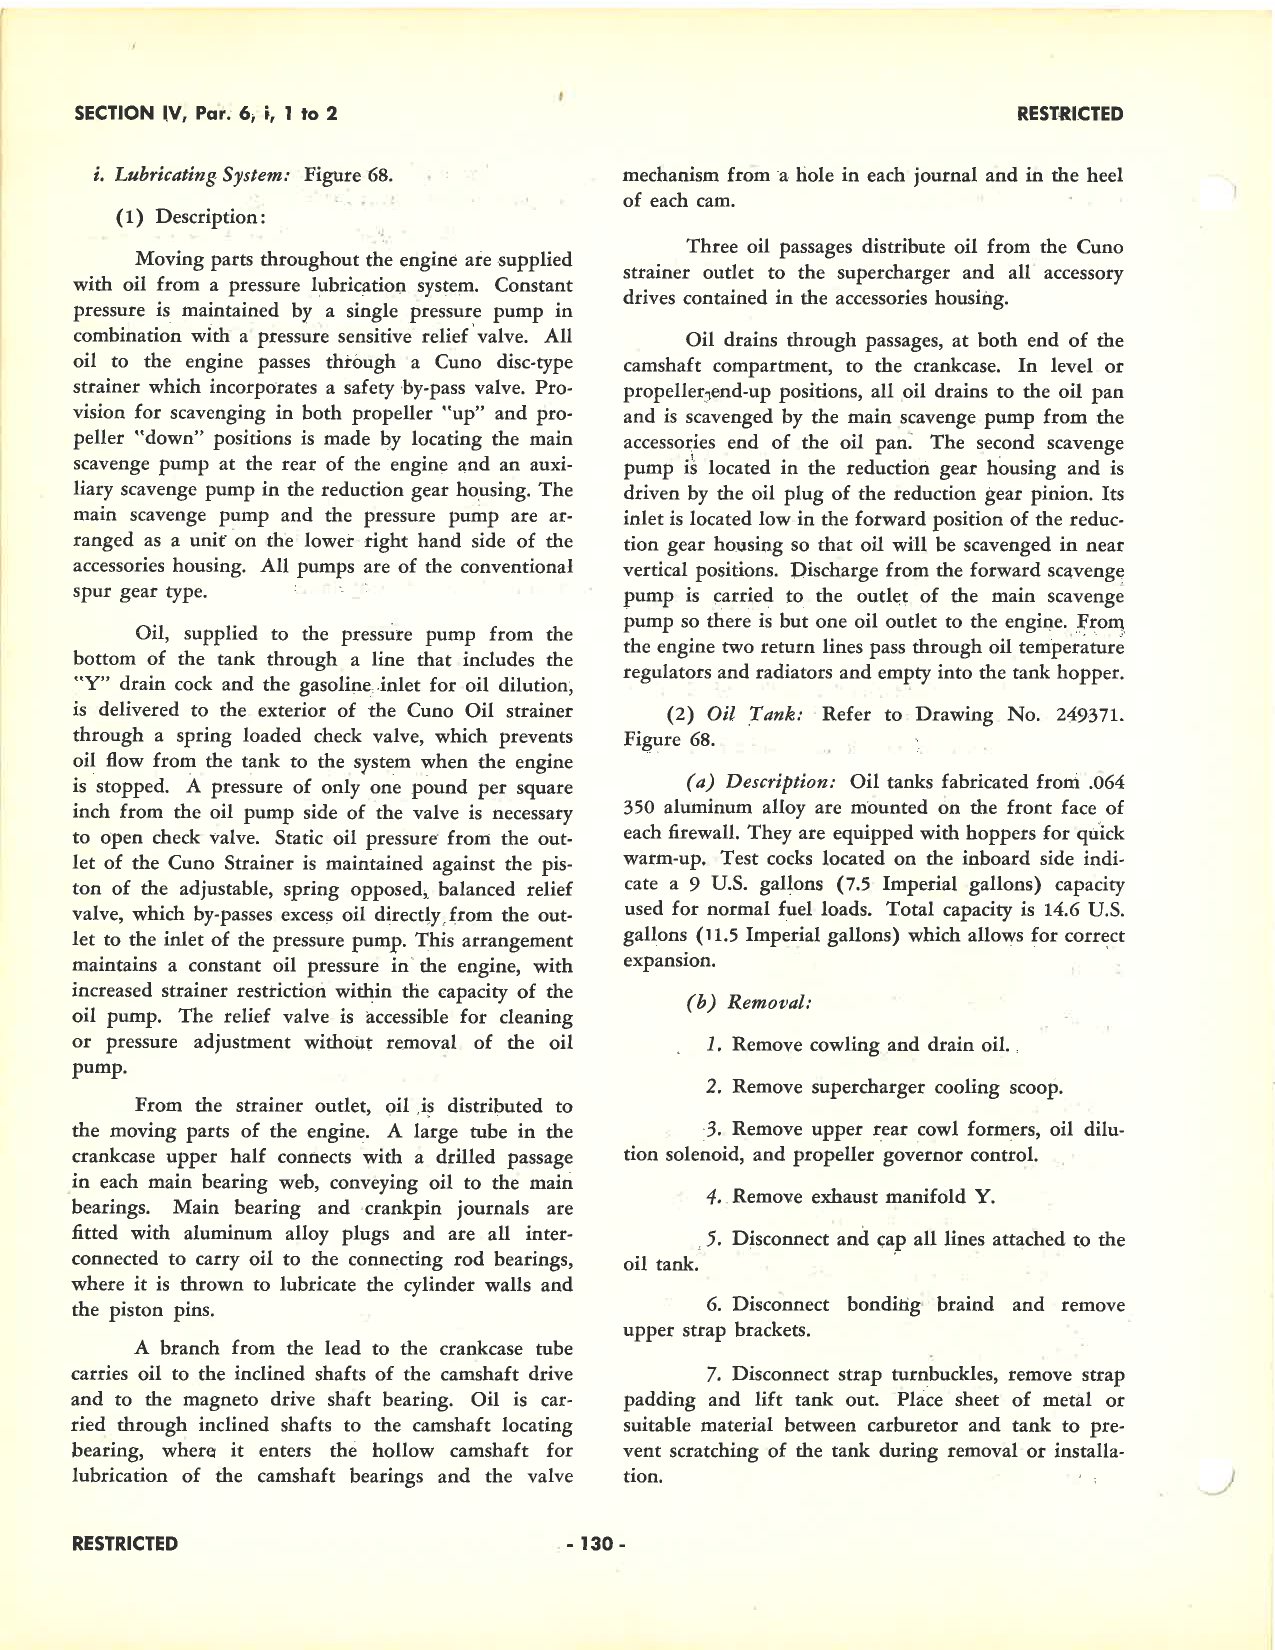 Sample page 133 from AirCorps Library document: Handbook of Instructions - Erection & Maintenance - P-38F